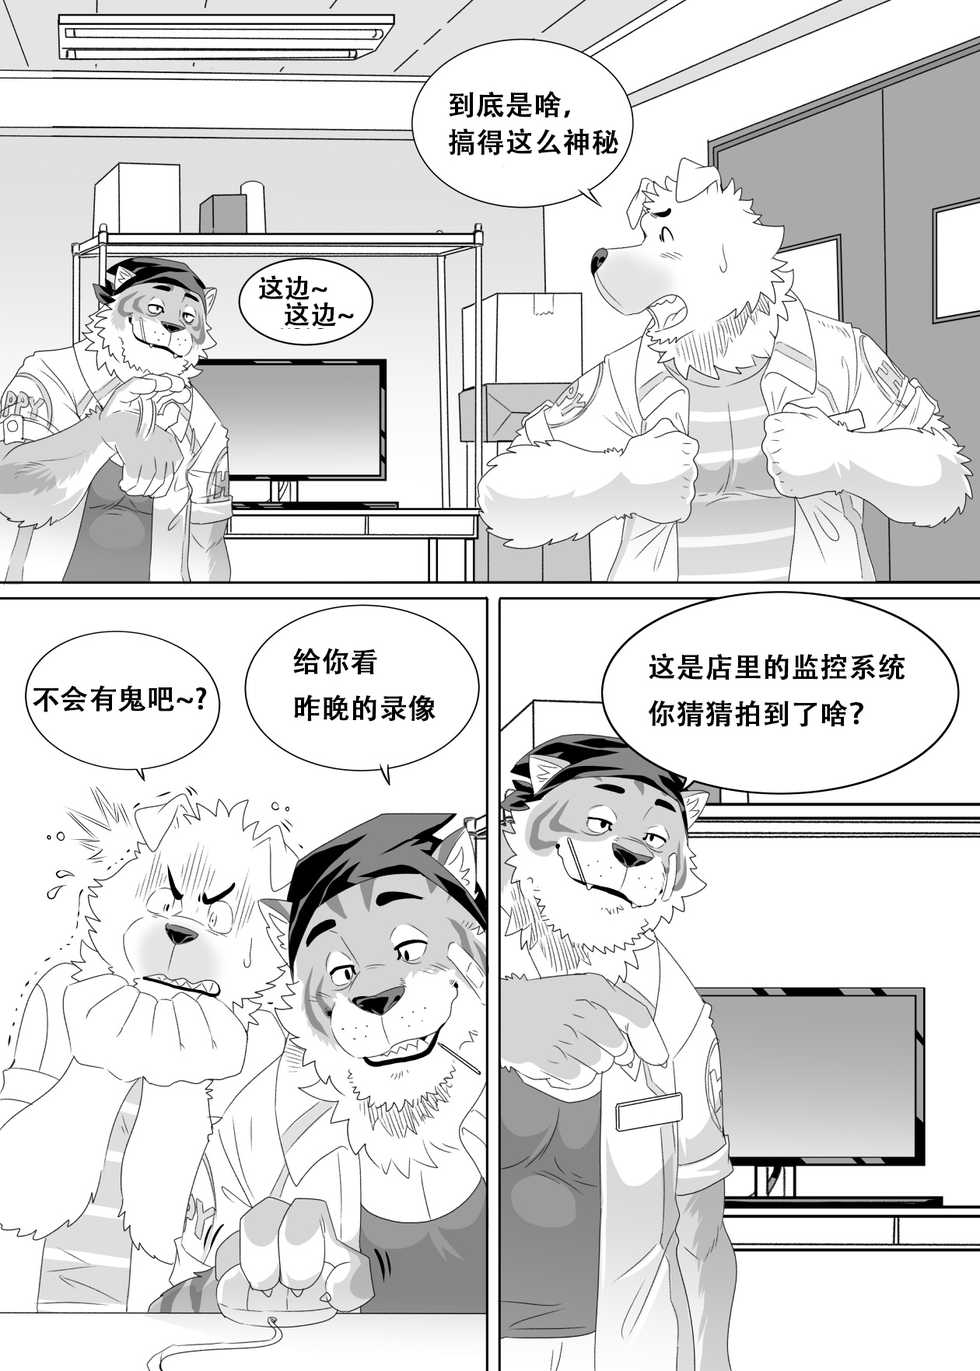 [KUMAHACHI] - "开心"便利店 ["Happy" Convenience Store] [Chinese] - Page 6